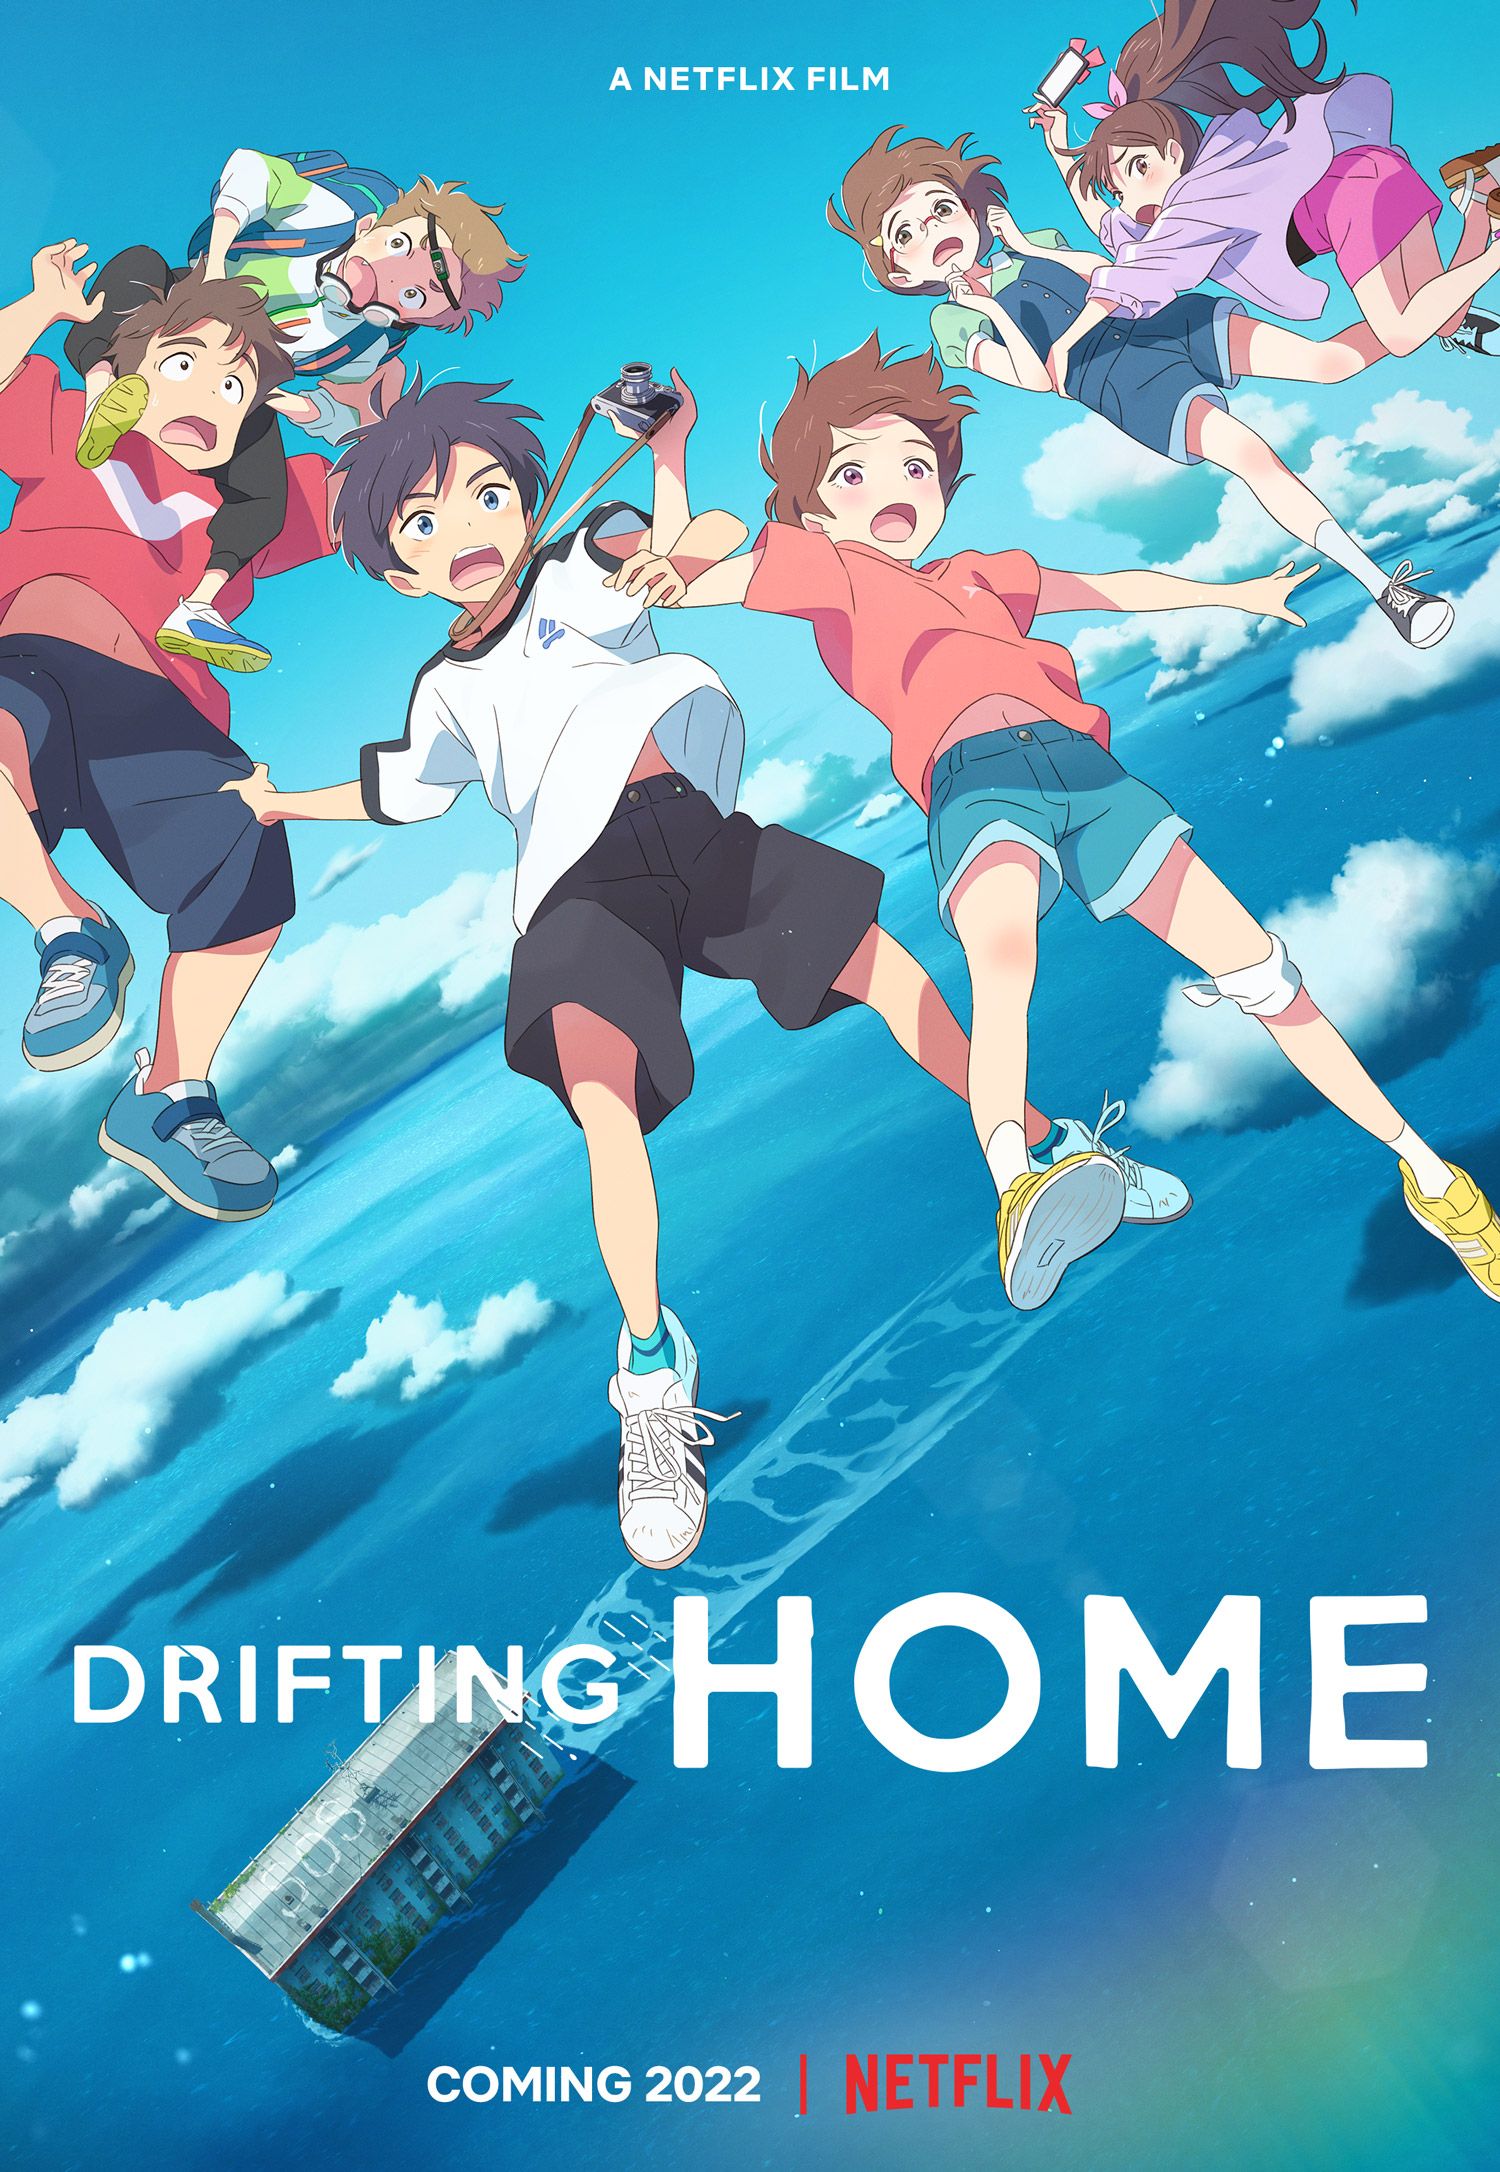 Drifting Home review: Is the Netflix anime worth your time?